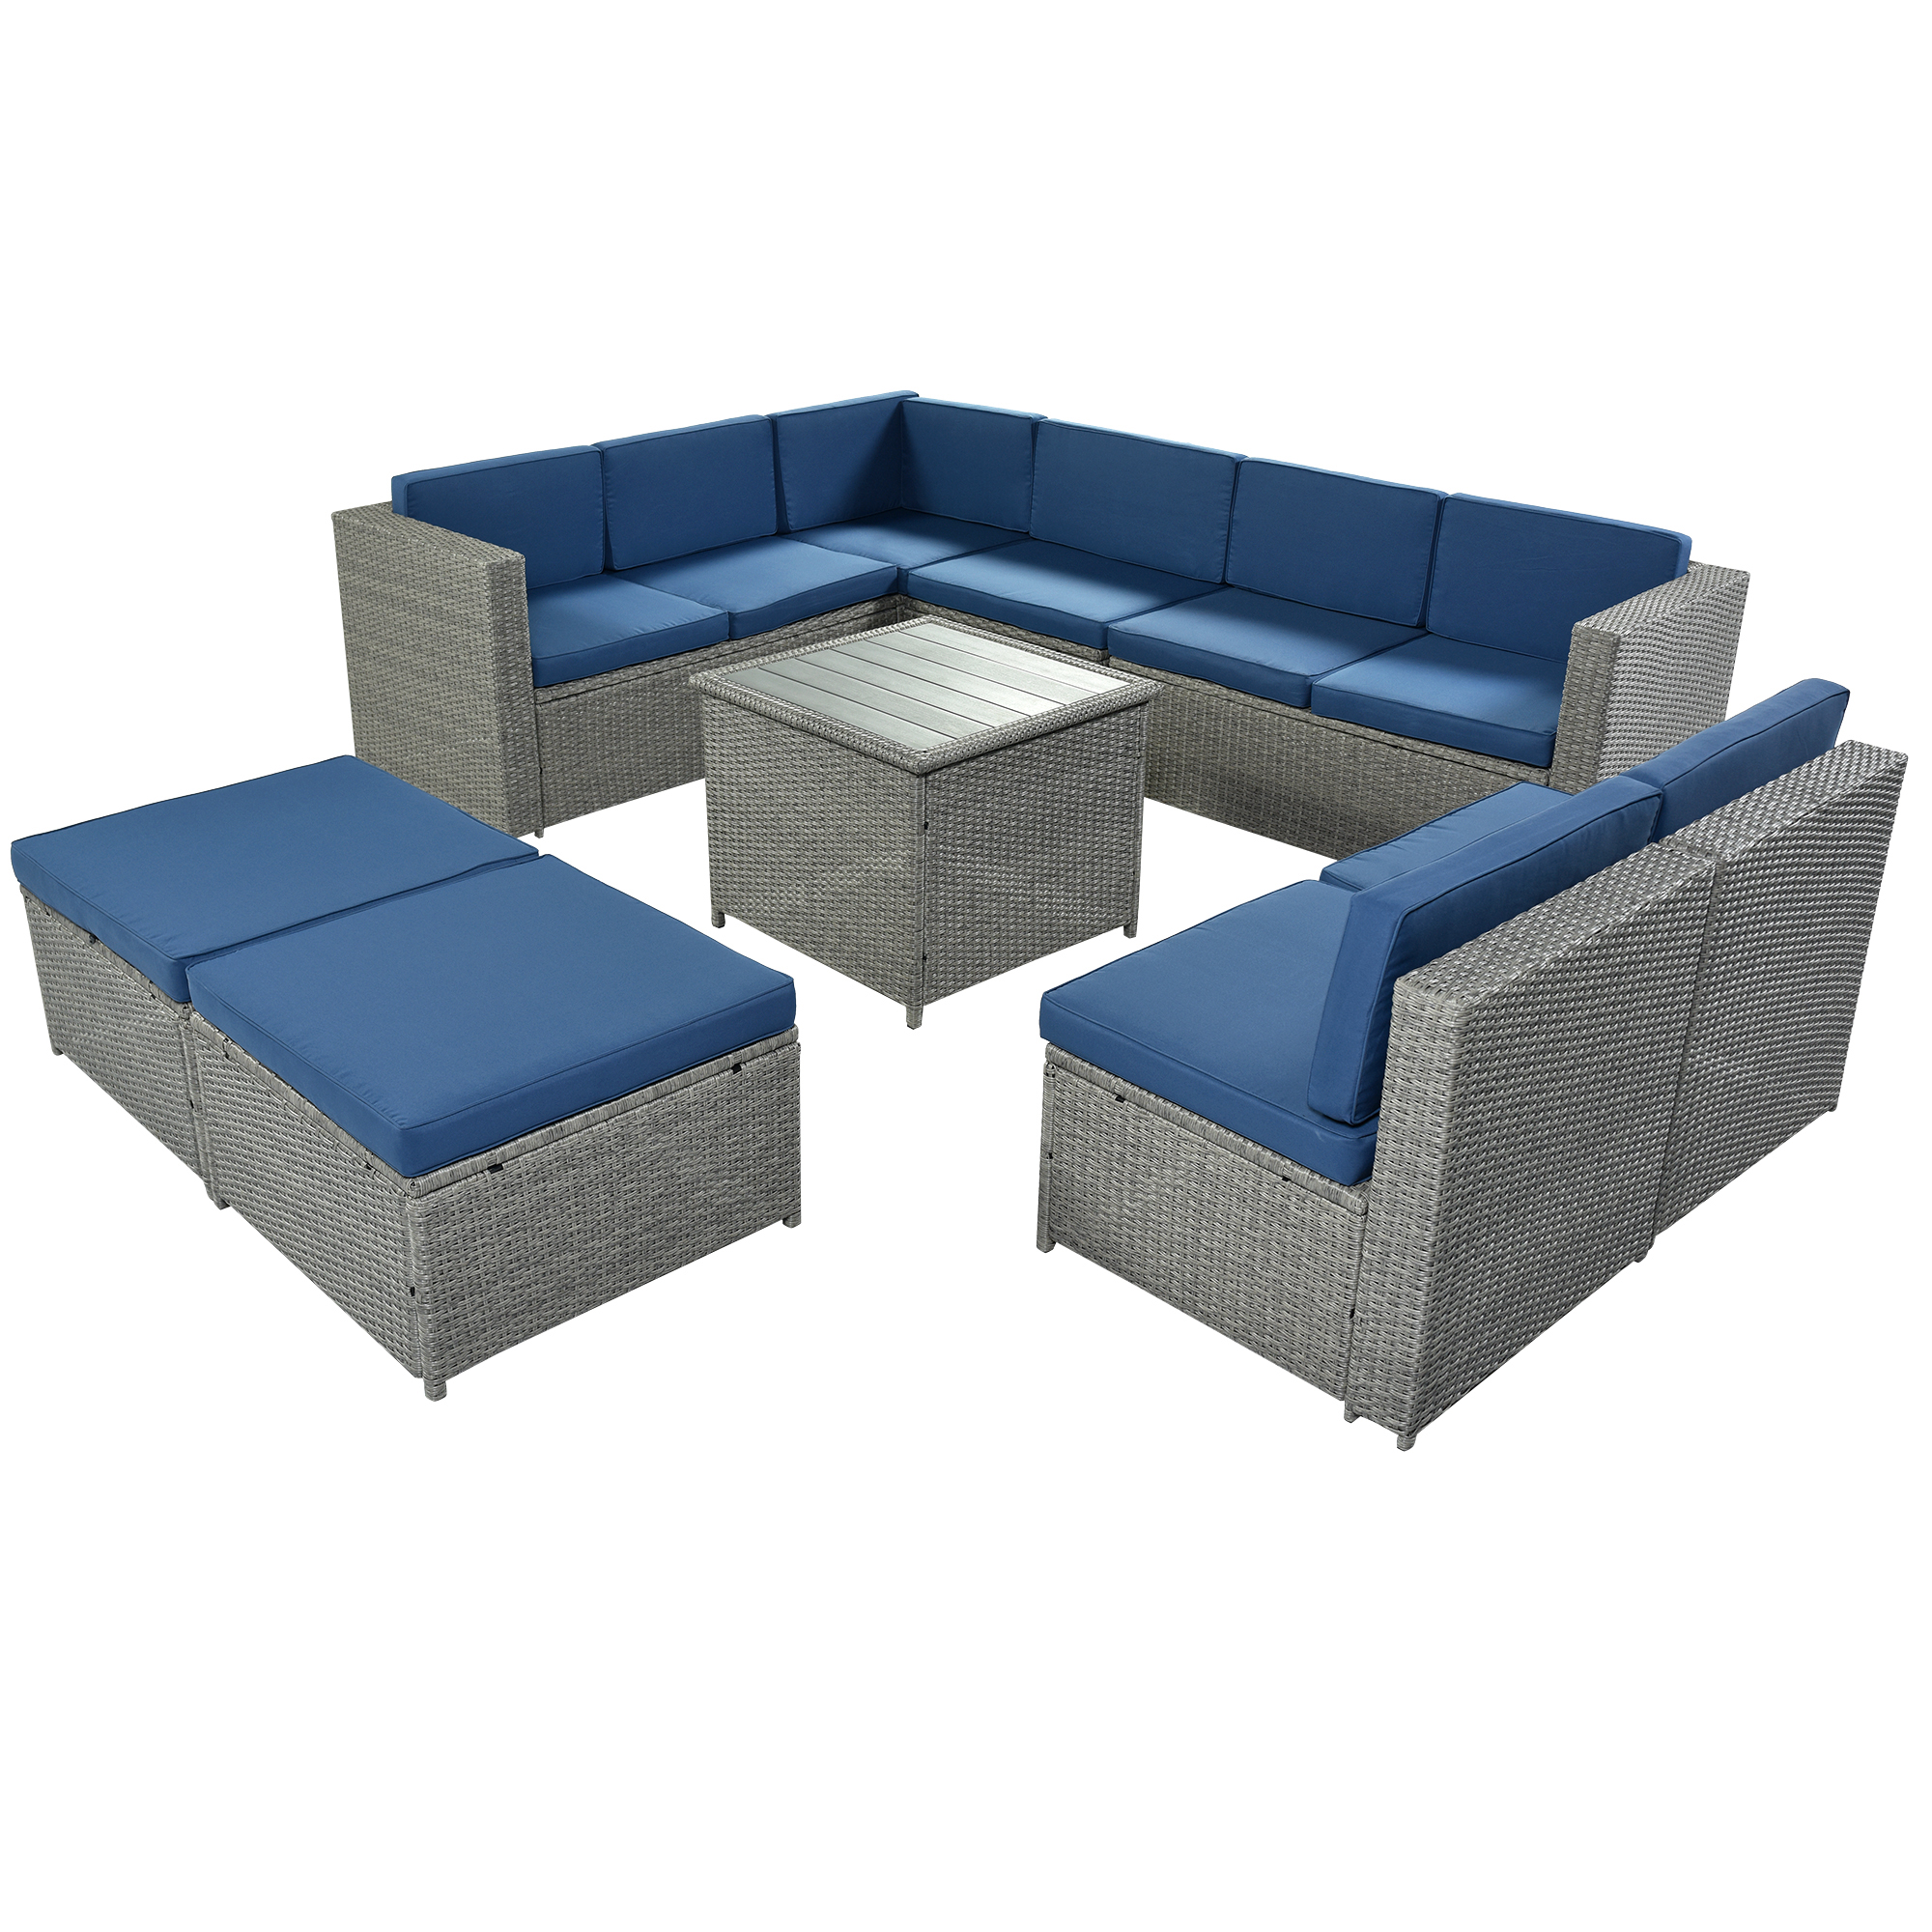  9 Piece Rattan Sectional Seating Group with Cushions and Ottoman, Patio Furniture Sets, Outdoor Wicker Sectional-CASAINC